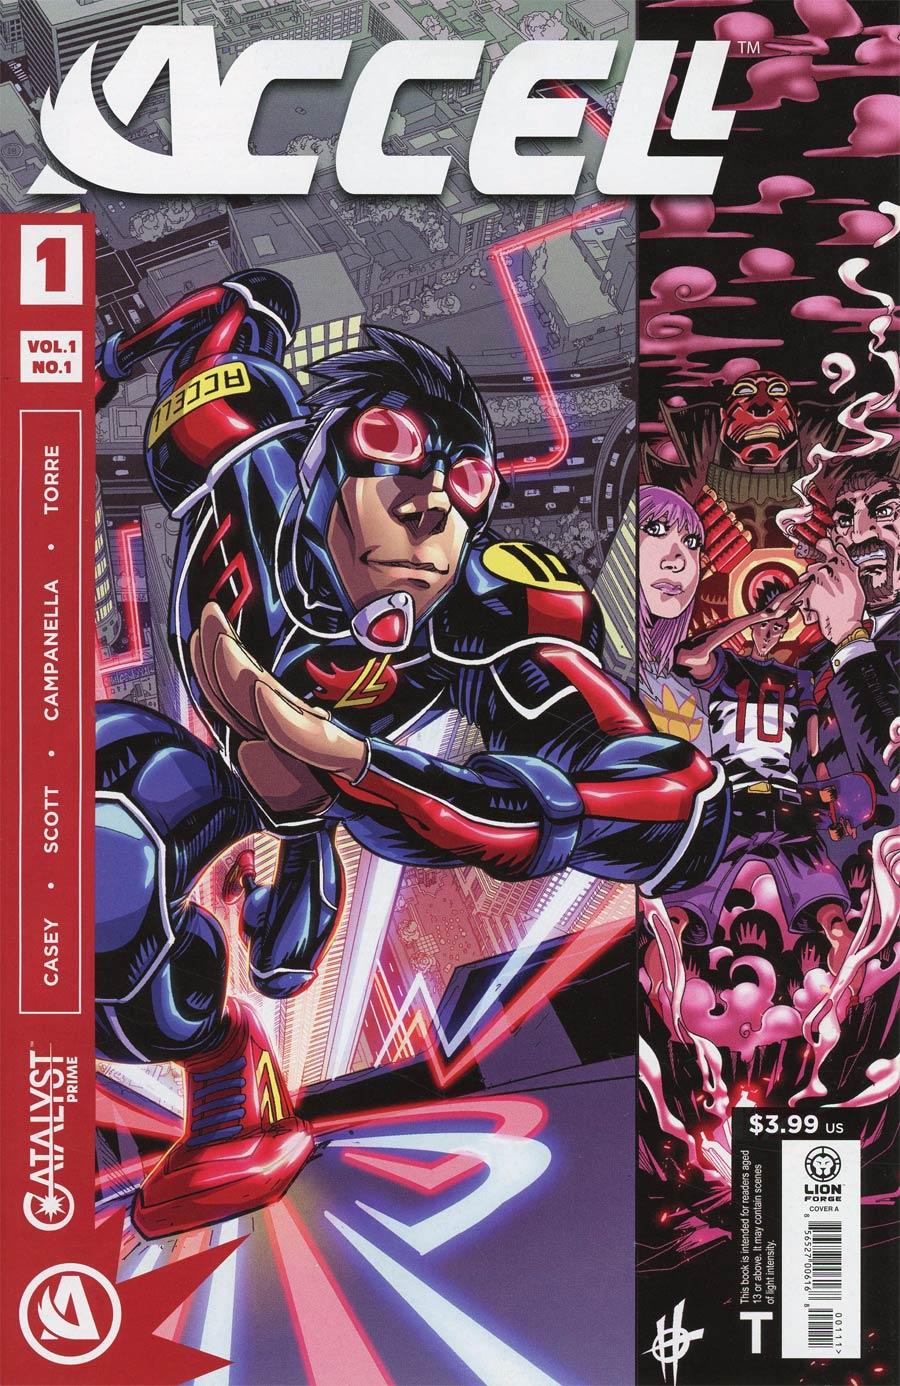 Catalyst Prime Accell Vol. 1 #1